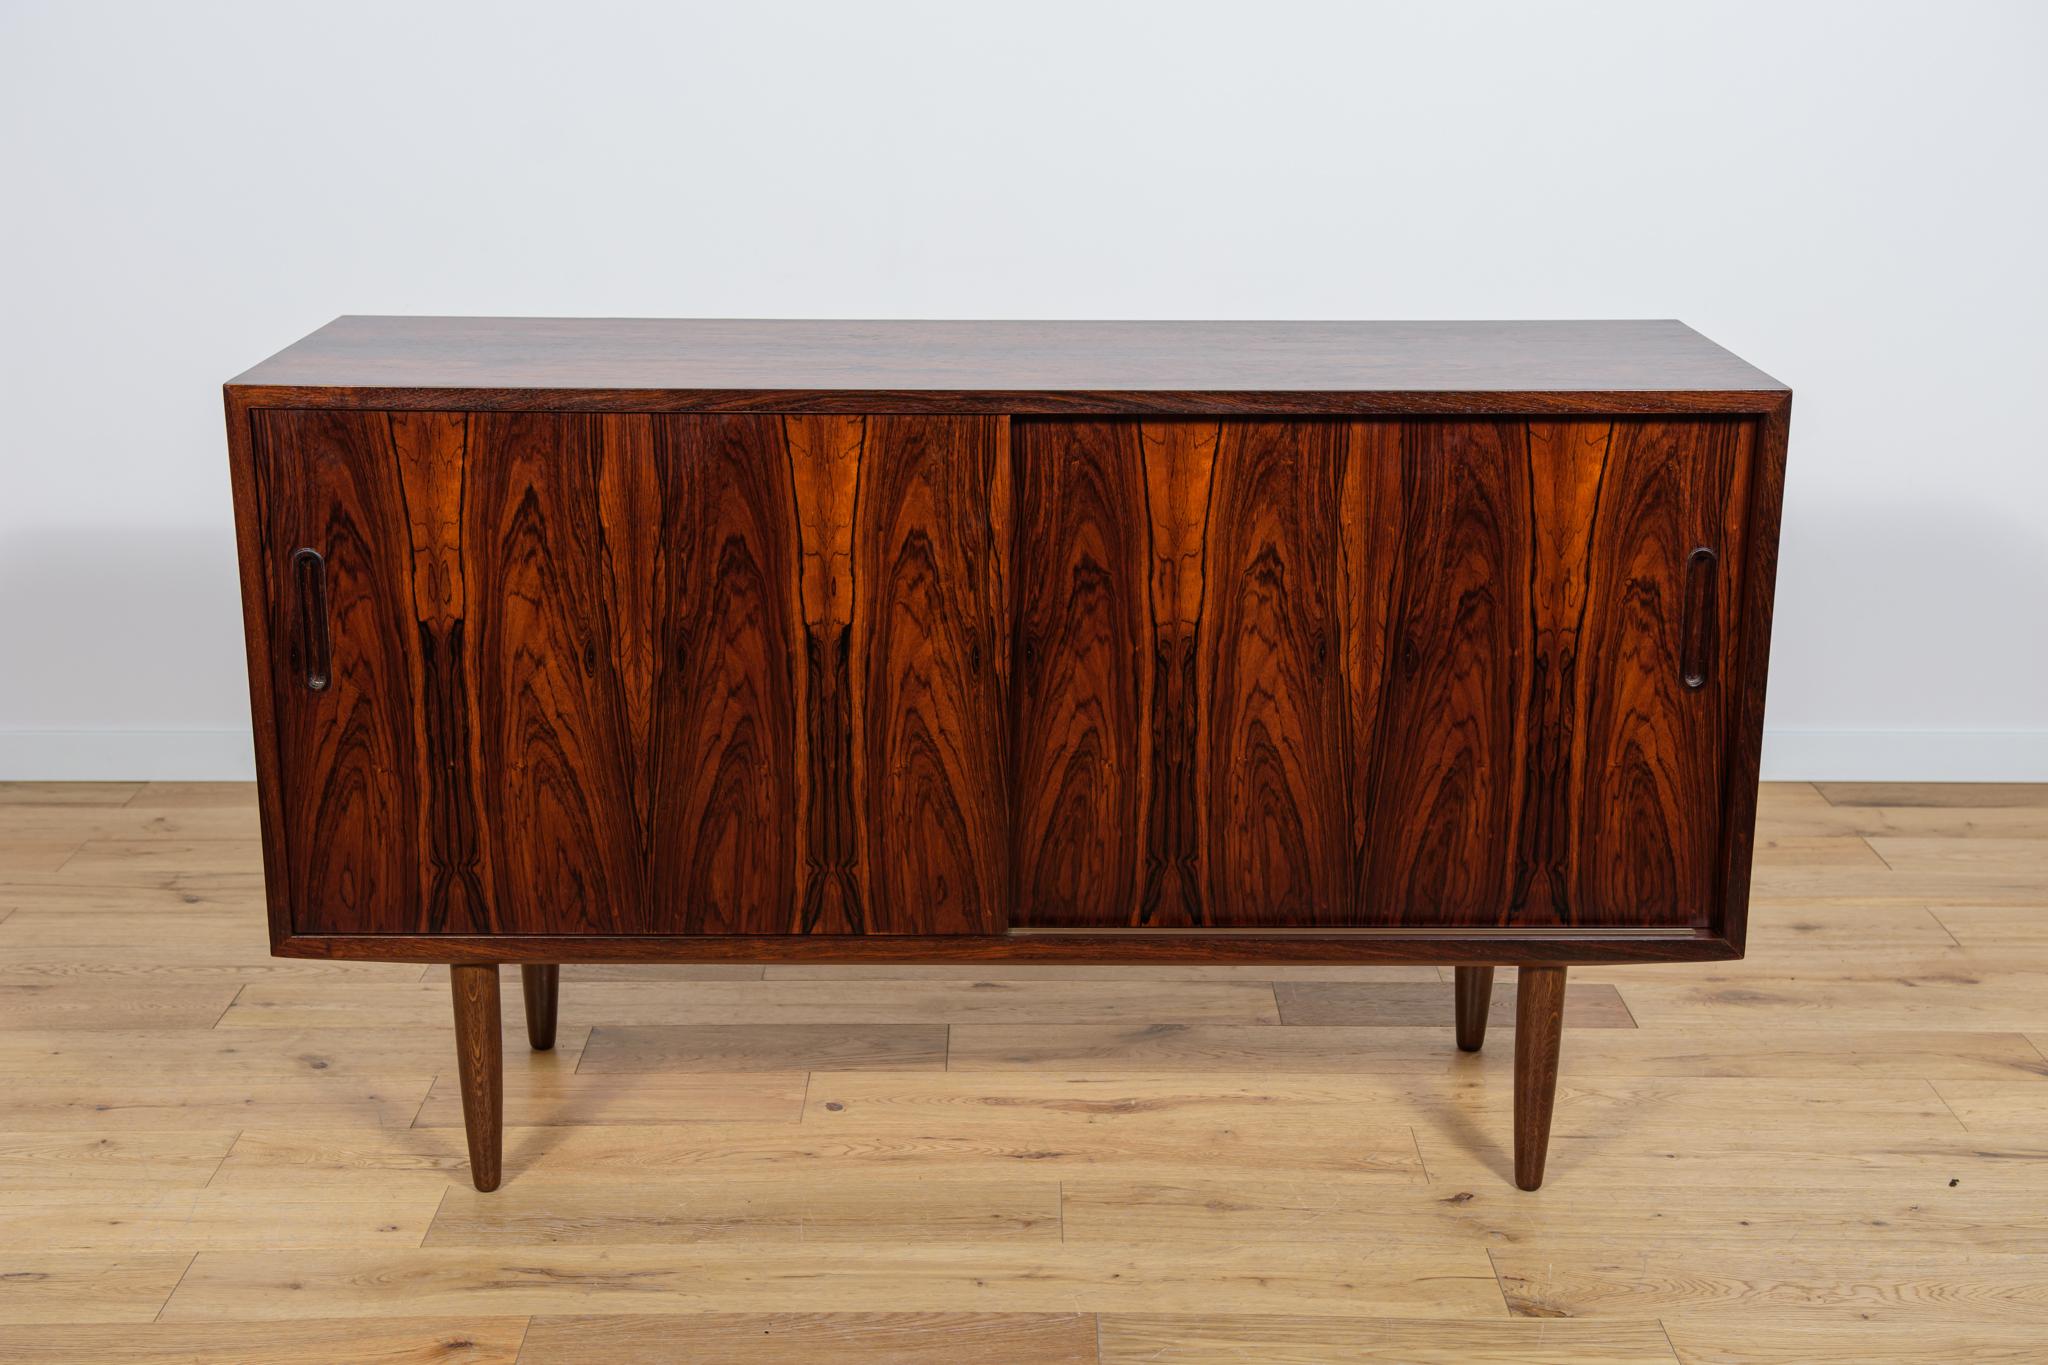 This is a small sideboard designed by Poul Hundevad in the 1960s. It was manufactured by the Hundevad & Co furniture factory in Denmark. Sideboard with two sliding doors, inside there are adjustable shelves and one drawer. The furniture is